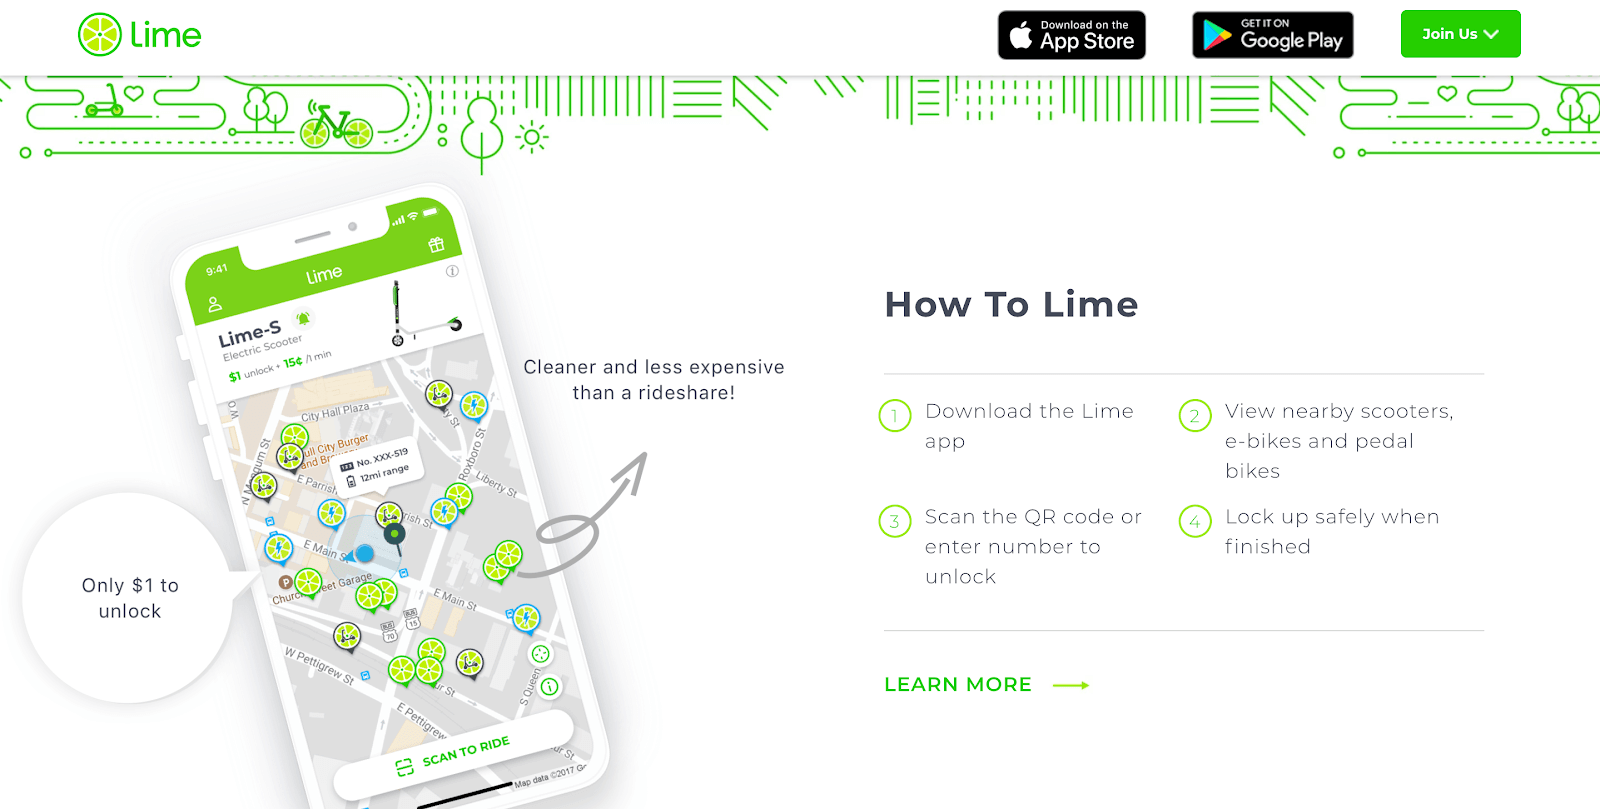 LimeBikes: a Lime webpage explaining how to use the service